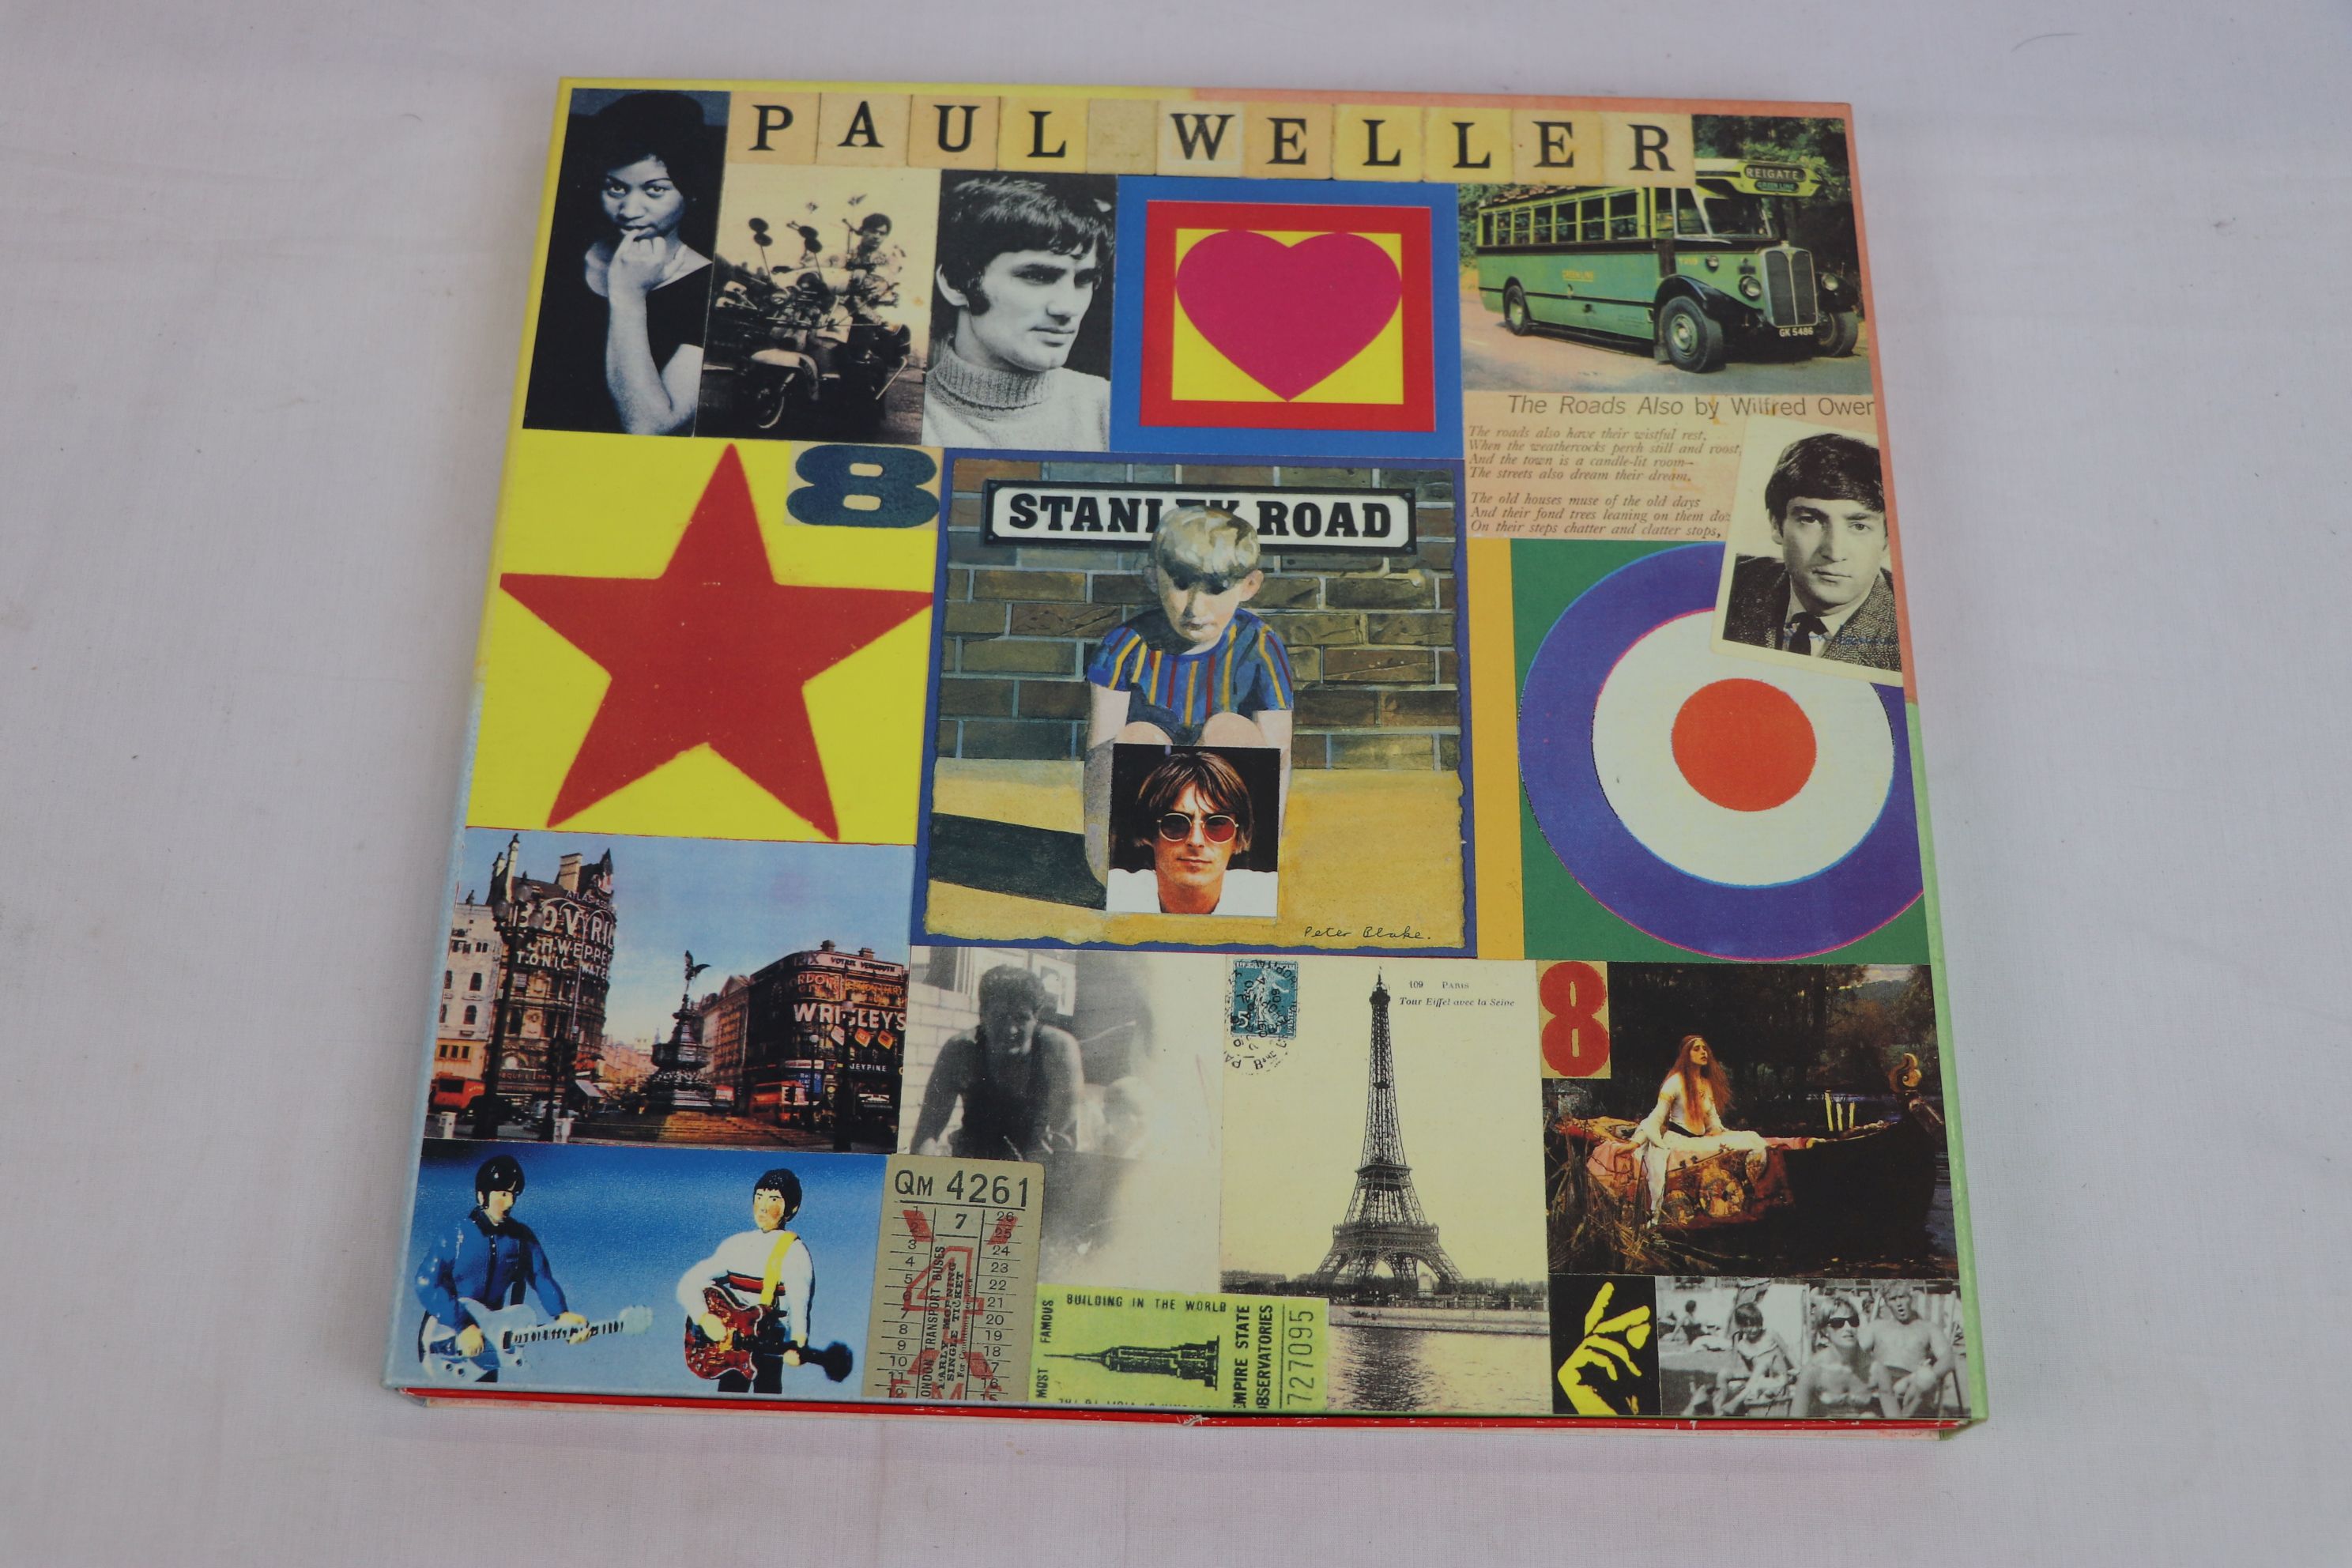 Vinyl & CD Box Sets - Six sets to include Paul Weller Stanley Road (CD), The Beatles Past Masters - Image 7 of 7